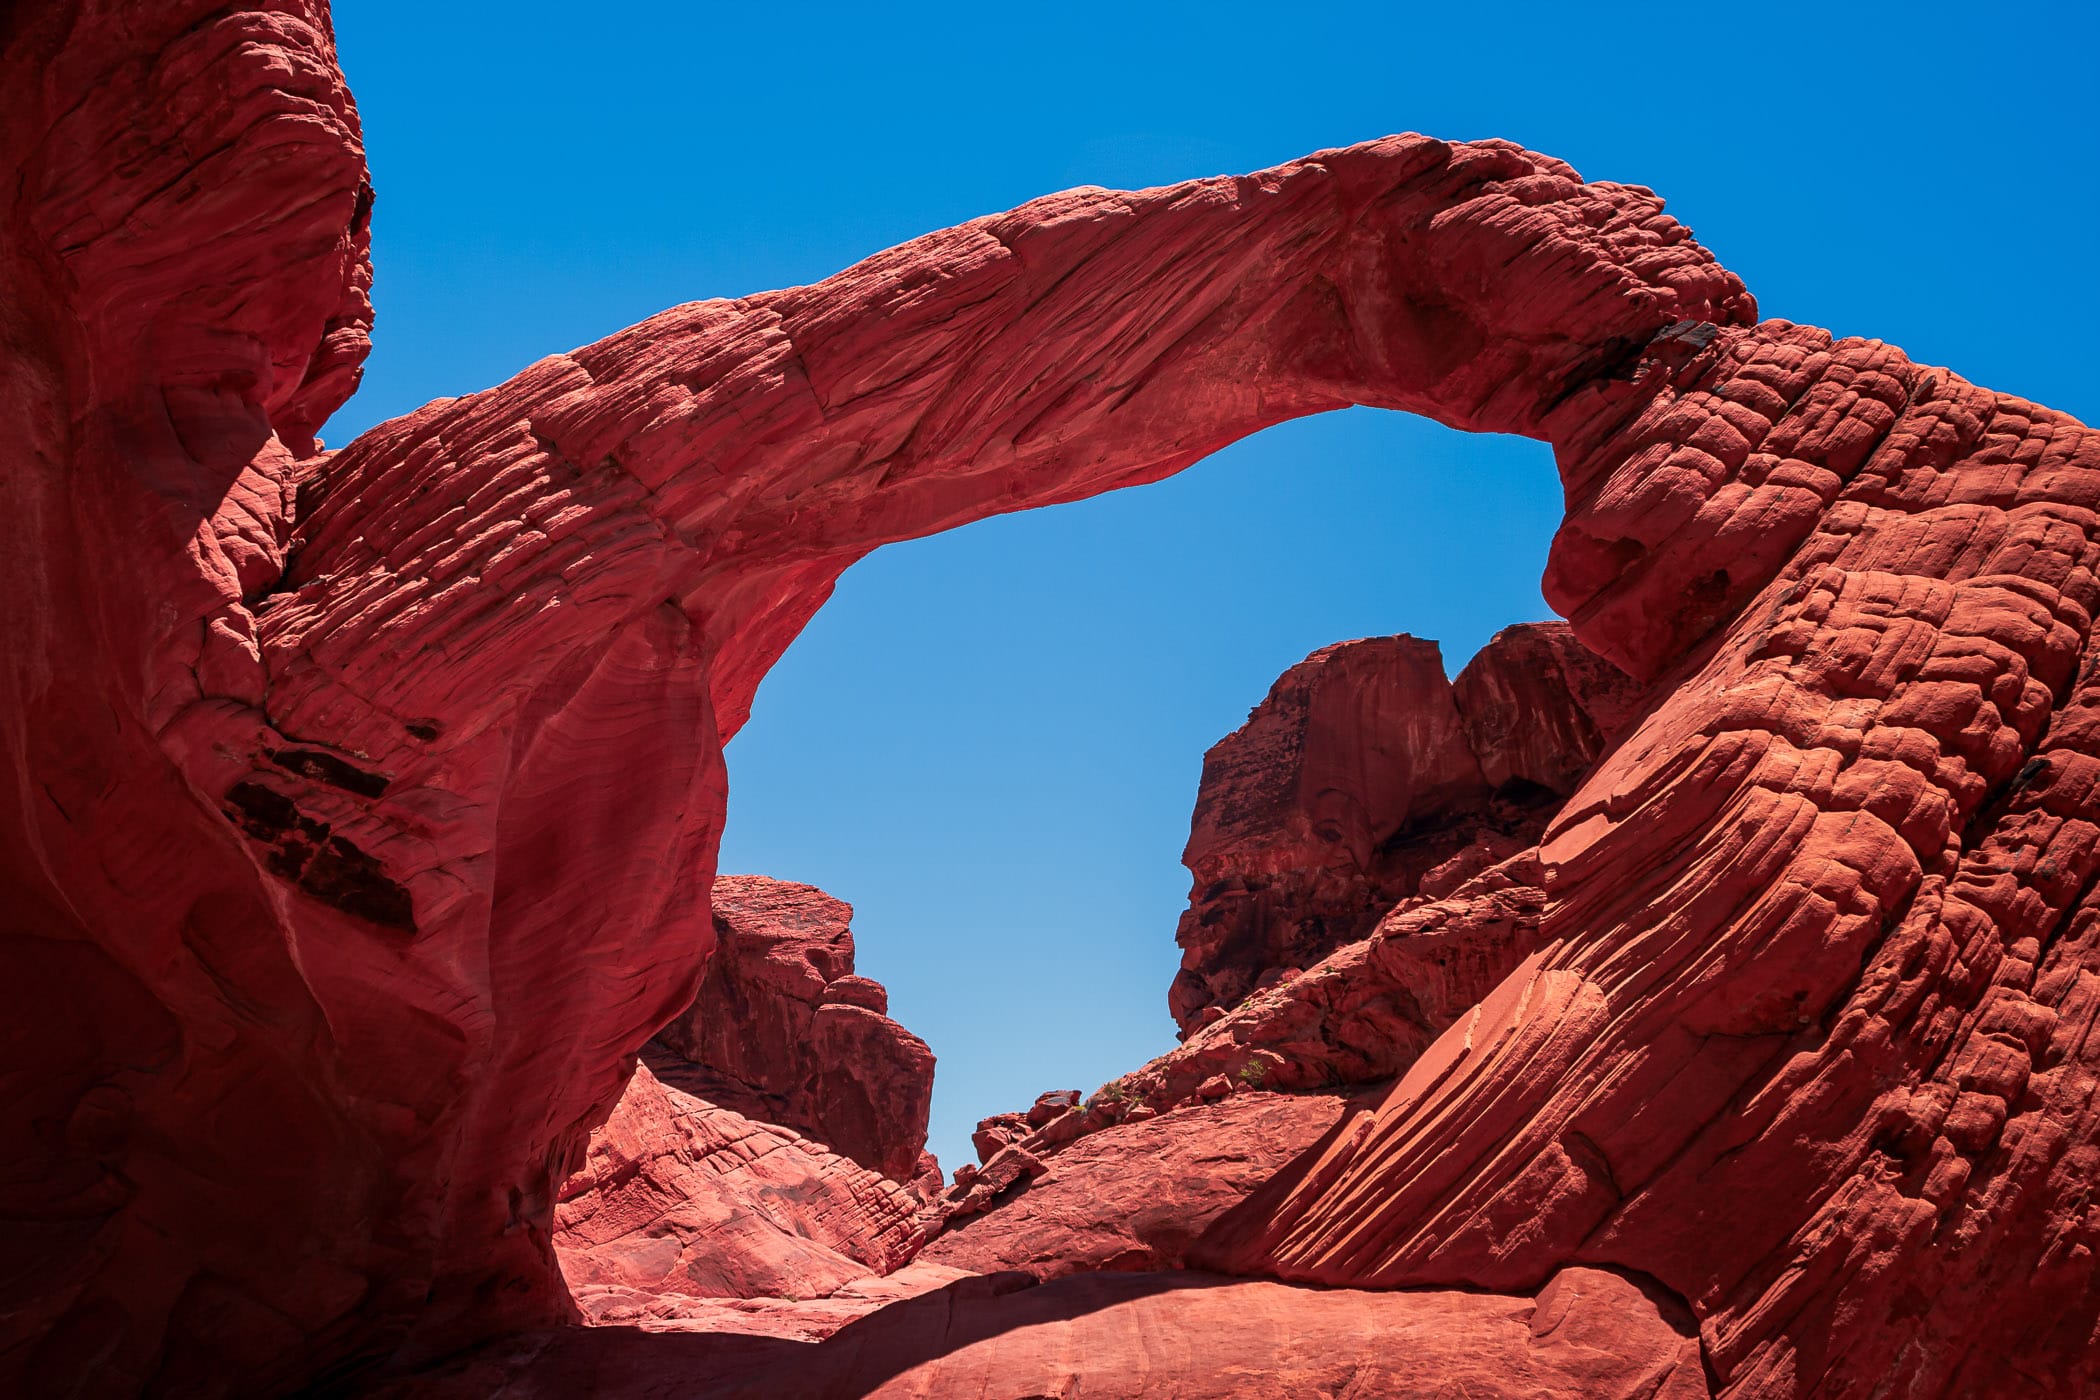 A stone arch at the Valley of Fire, Nevada.